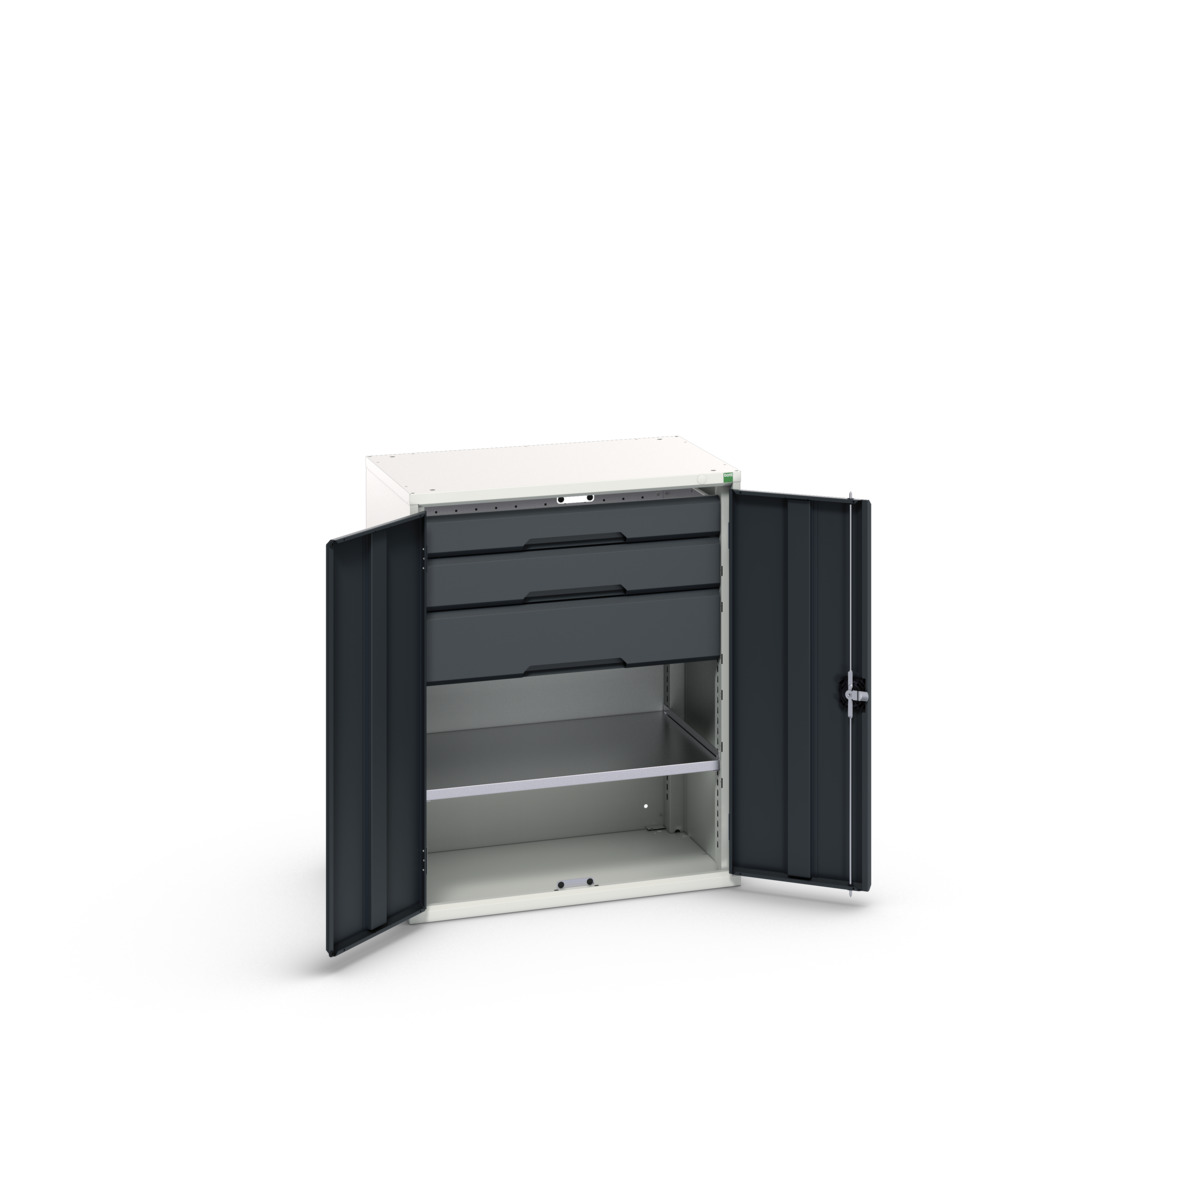 16926454.19 - verso kitted cupboard